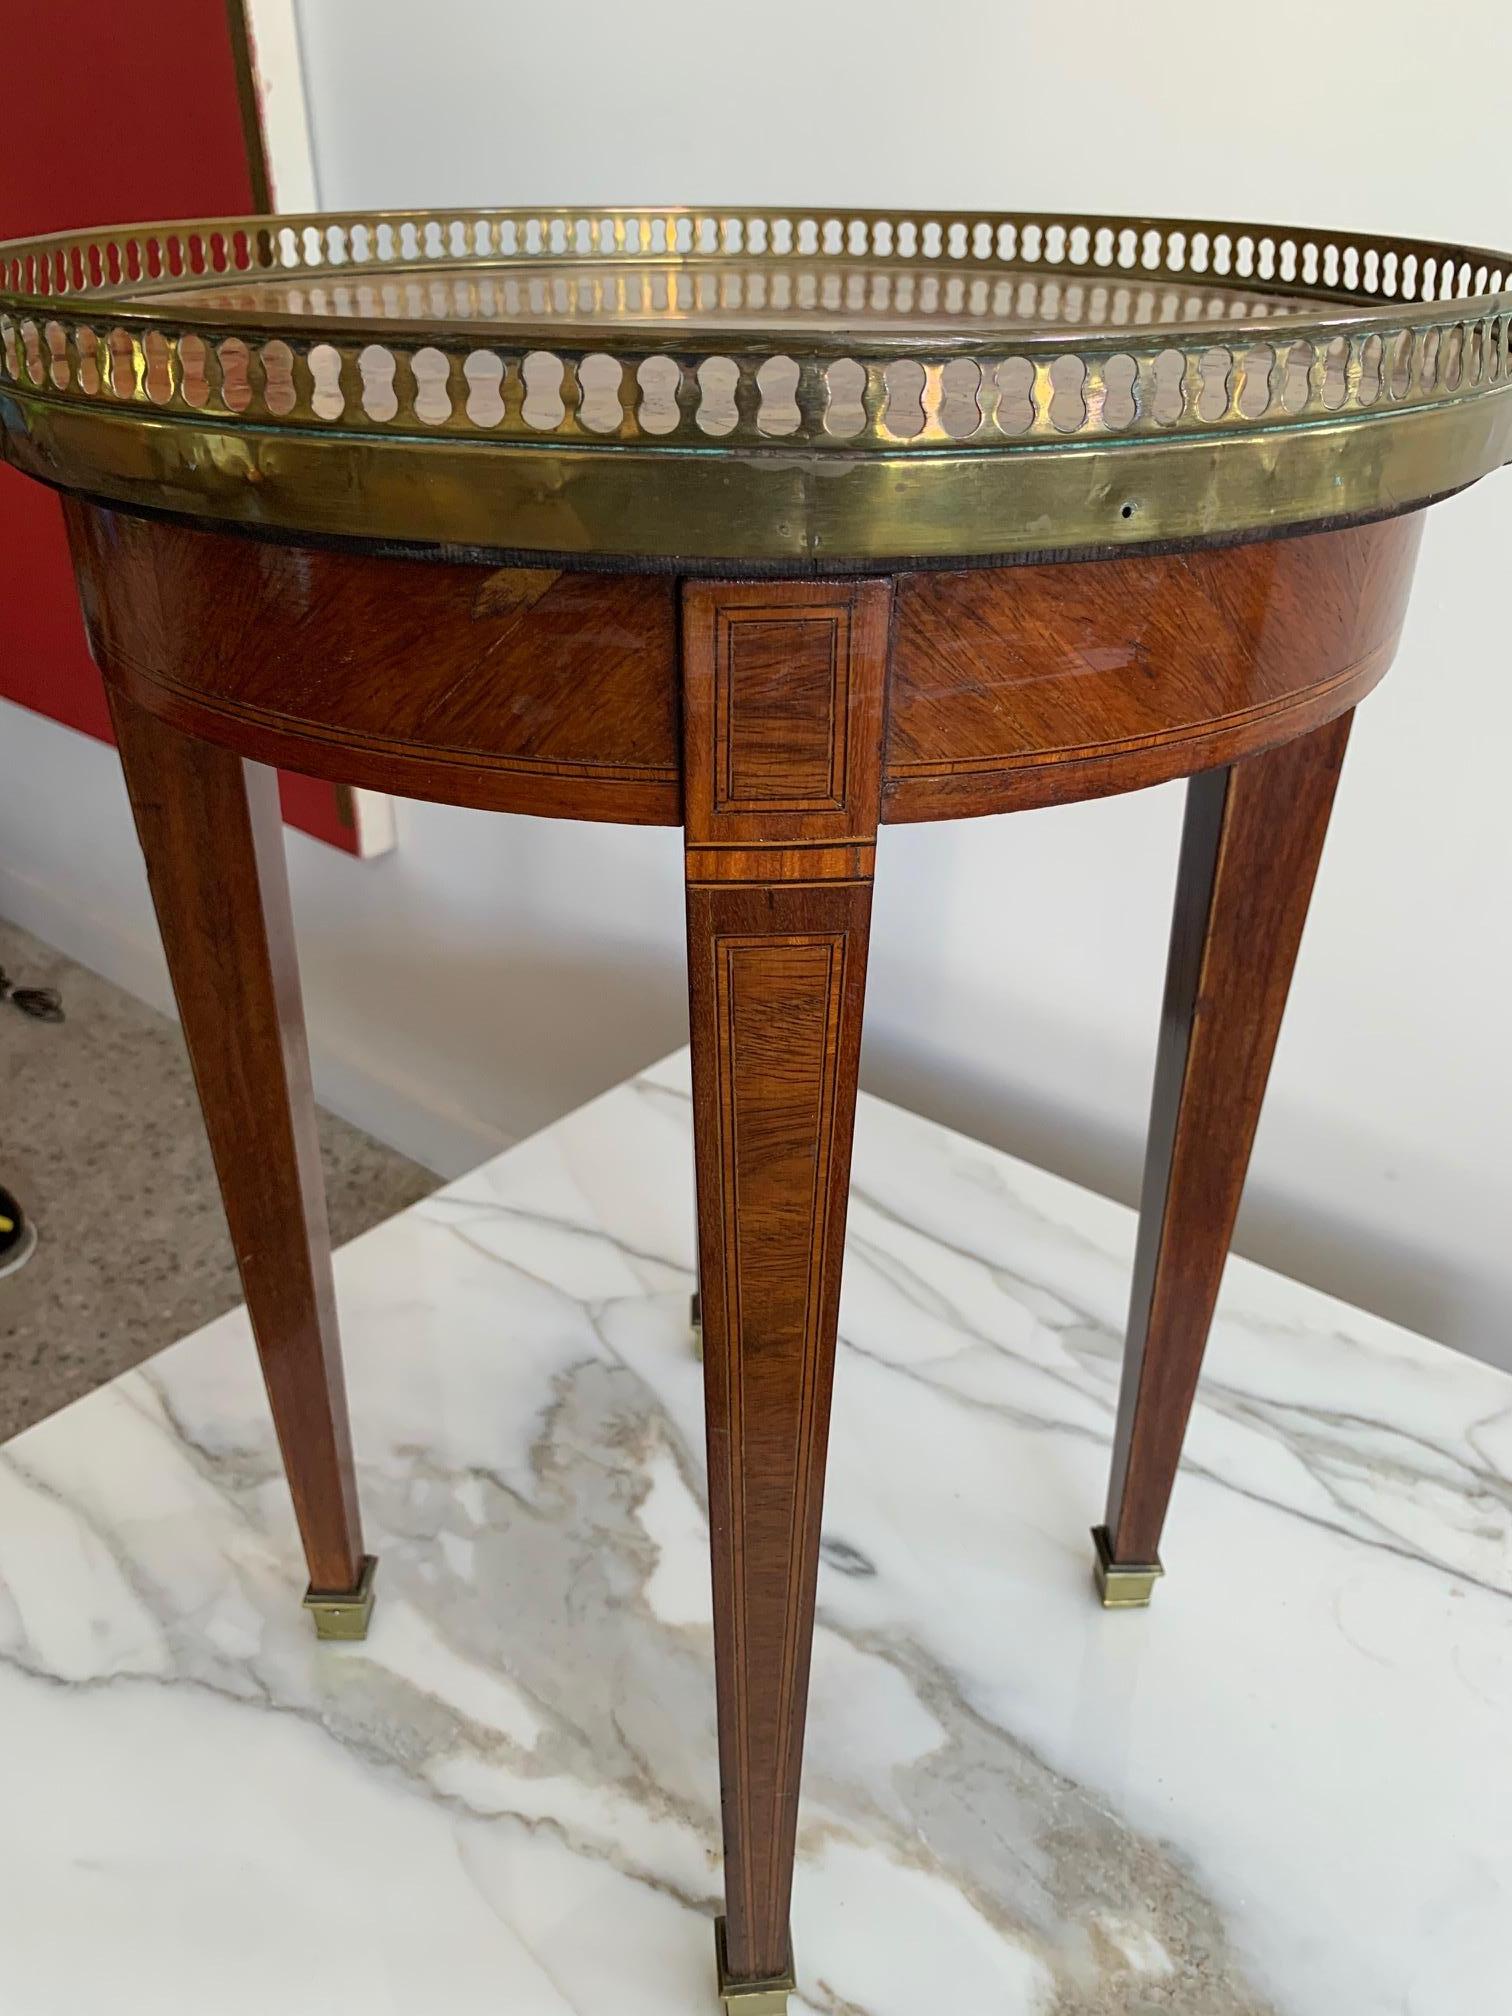 Early 20th Century French Bouilotte Table with Marble Top Made by E.Kahn Paris